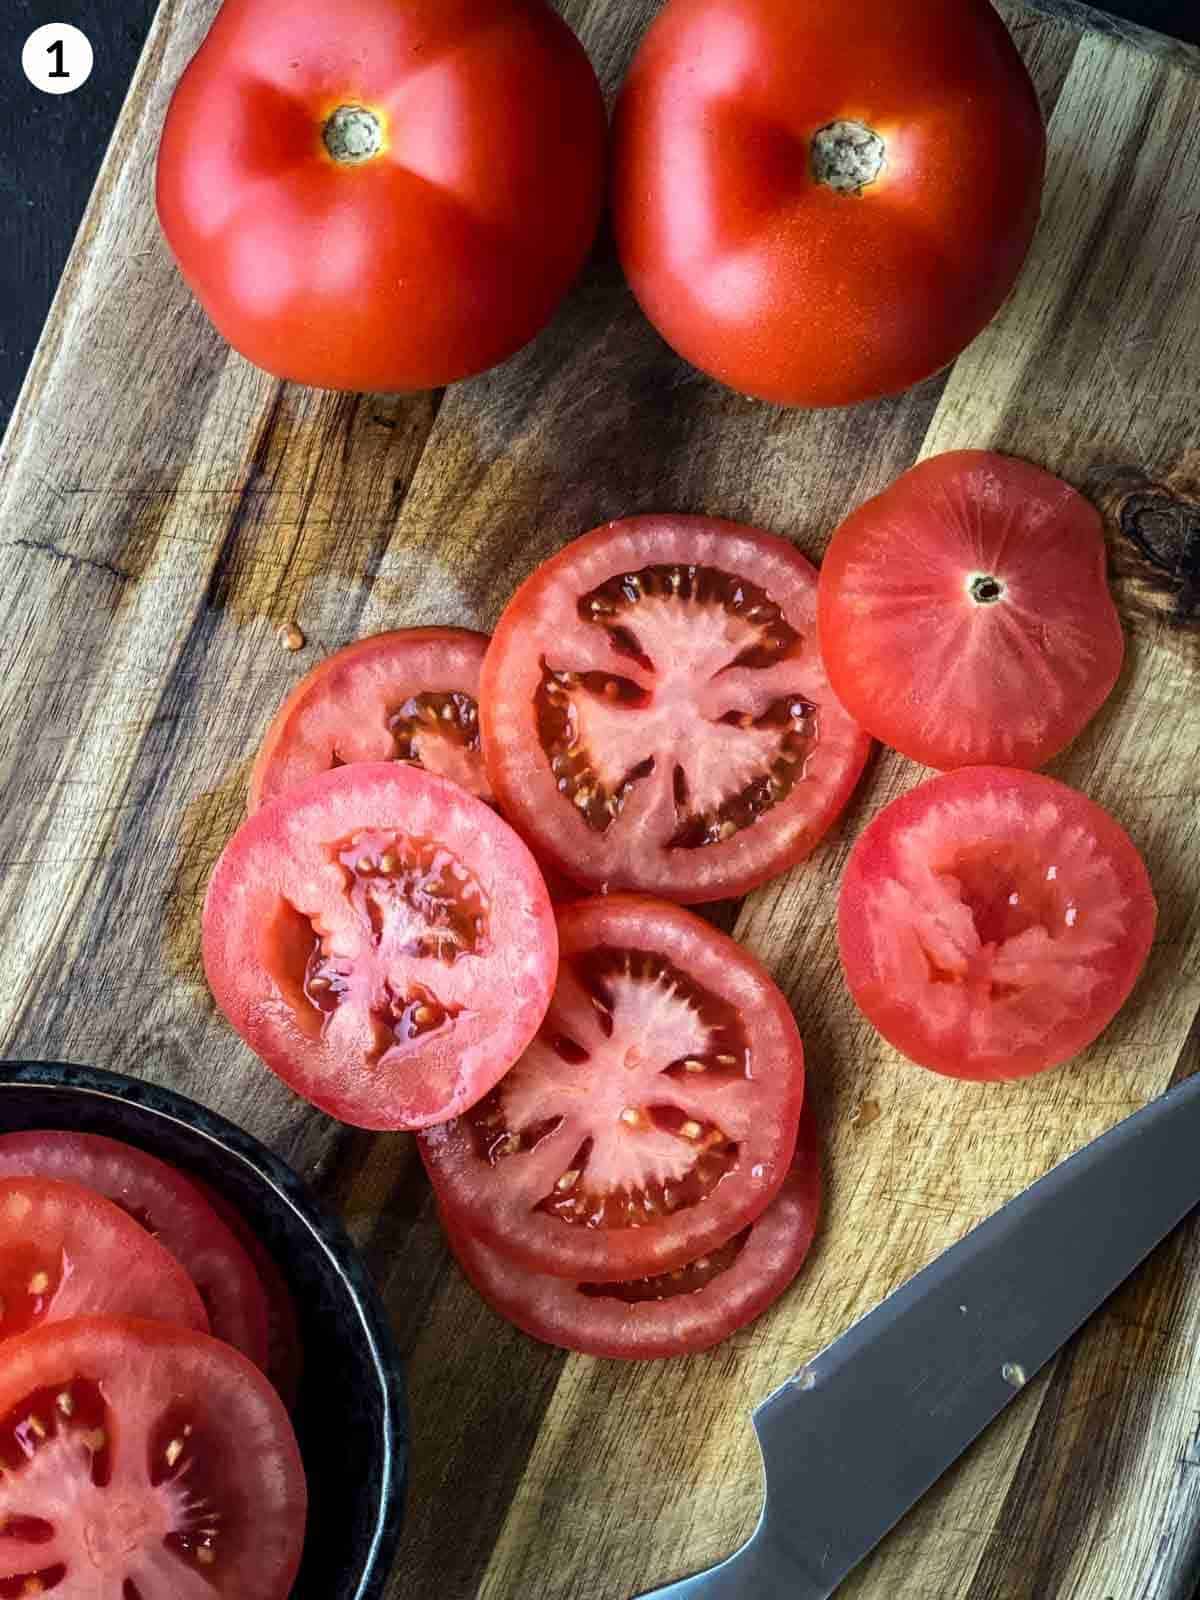 slices of tomato cut on a wooden chopping board with a knife and whole tomatoes next to them.